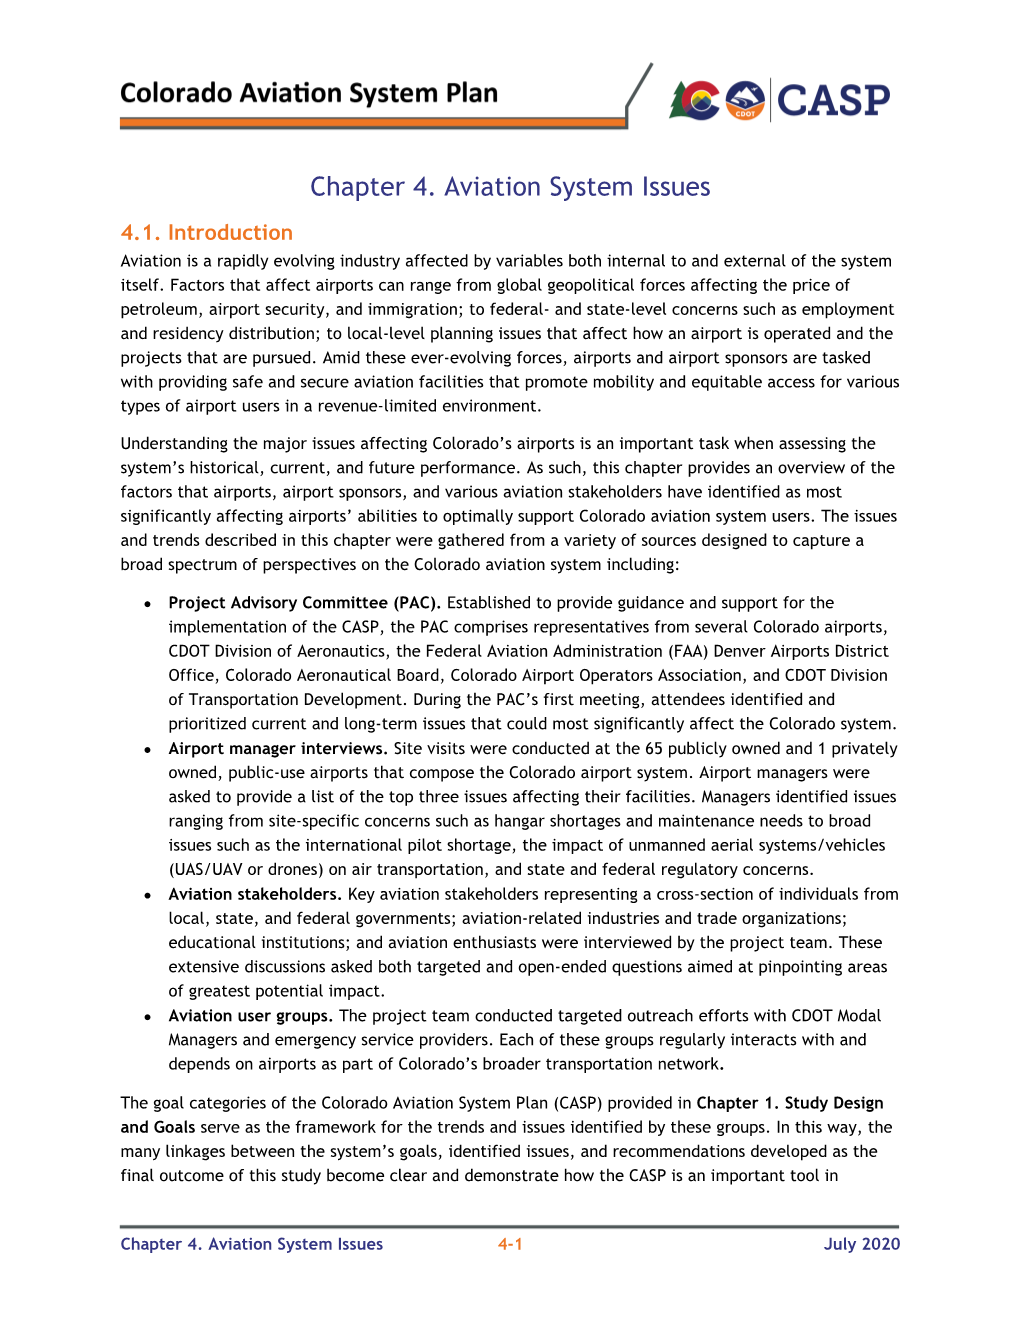 Chapter 4. Aviation System Issues